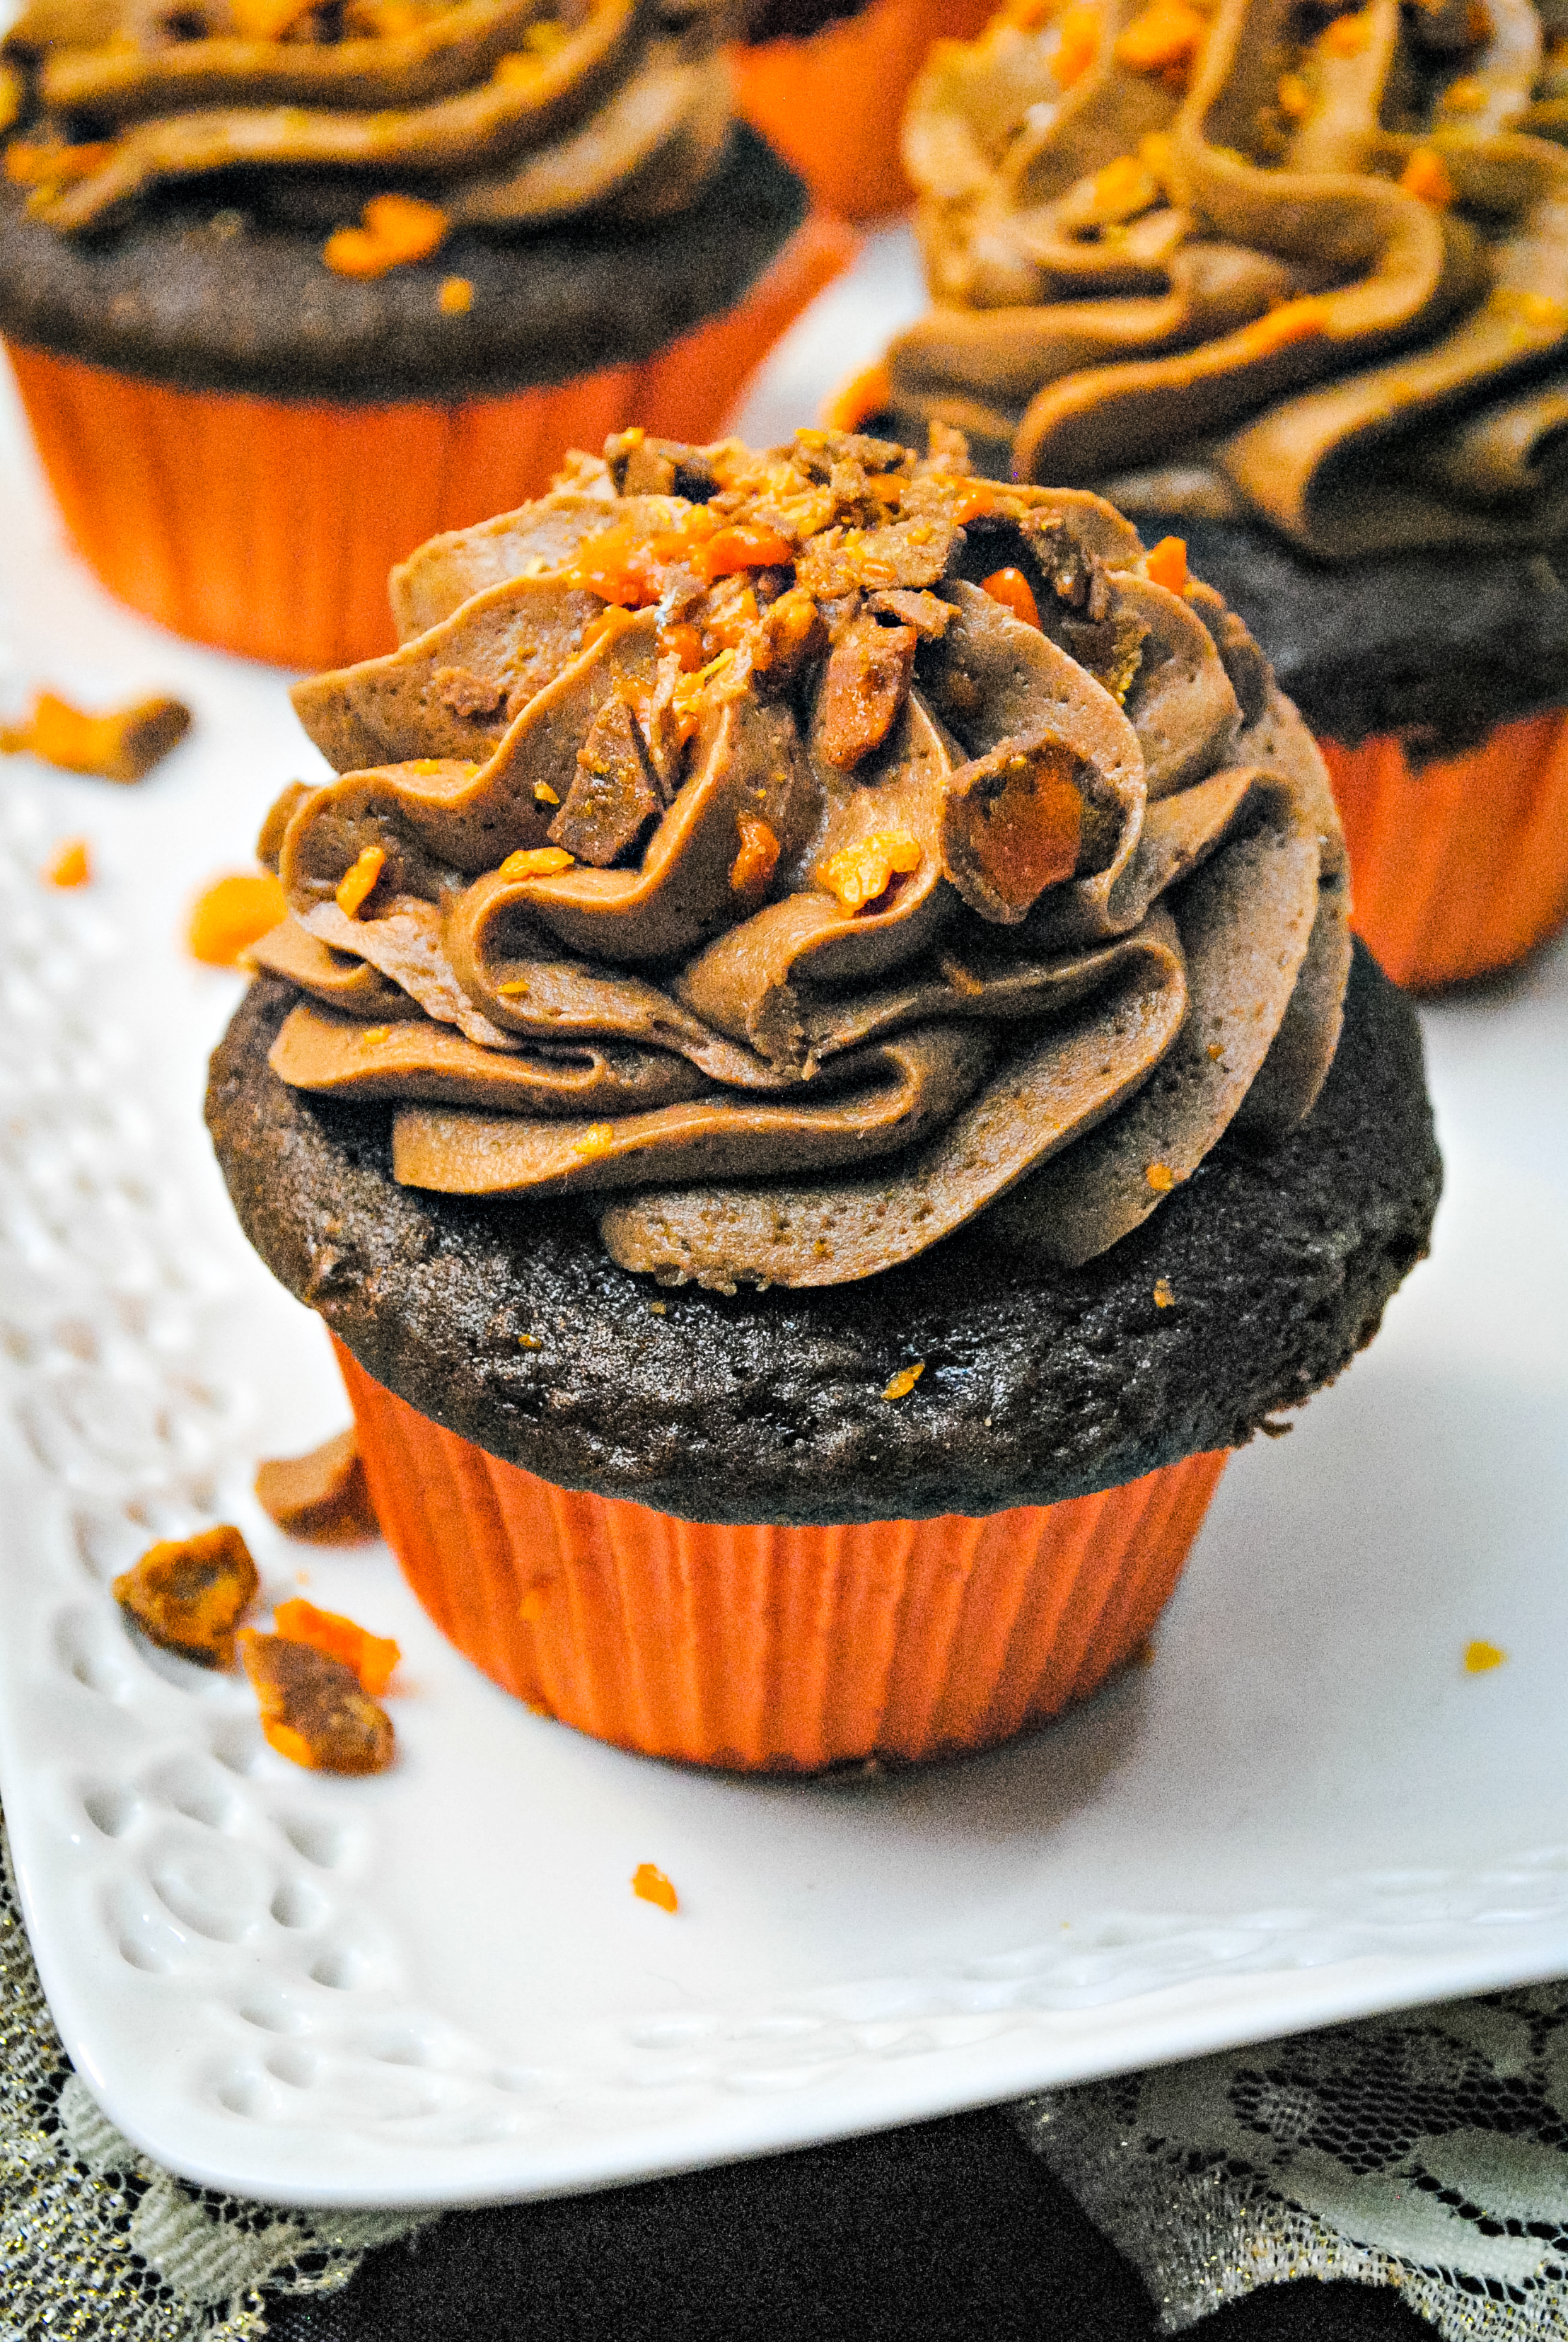 What to Do With Leftover Halloween Candy? Butterfinger Cupcakes are a way to use up Halloween candy or just add some delicious toppings.